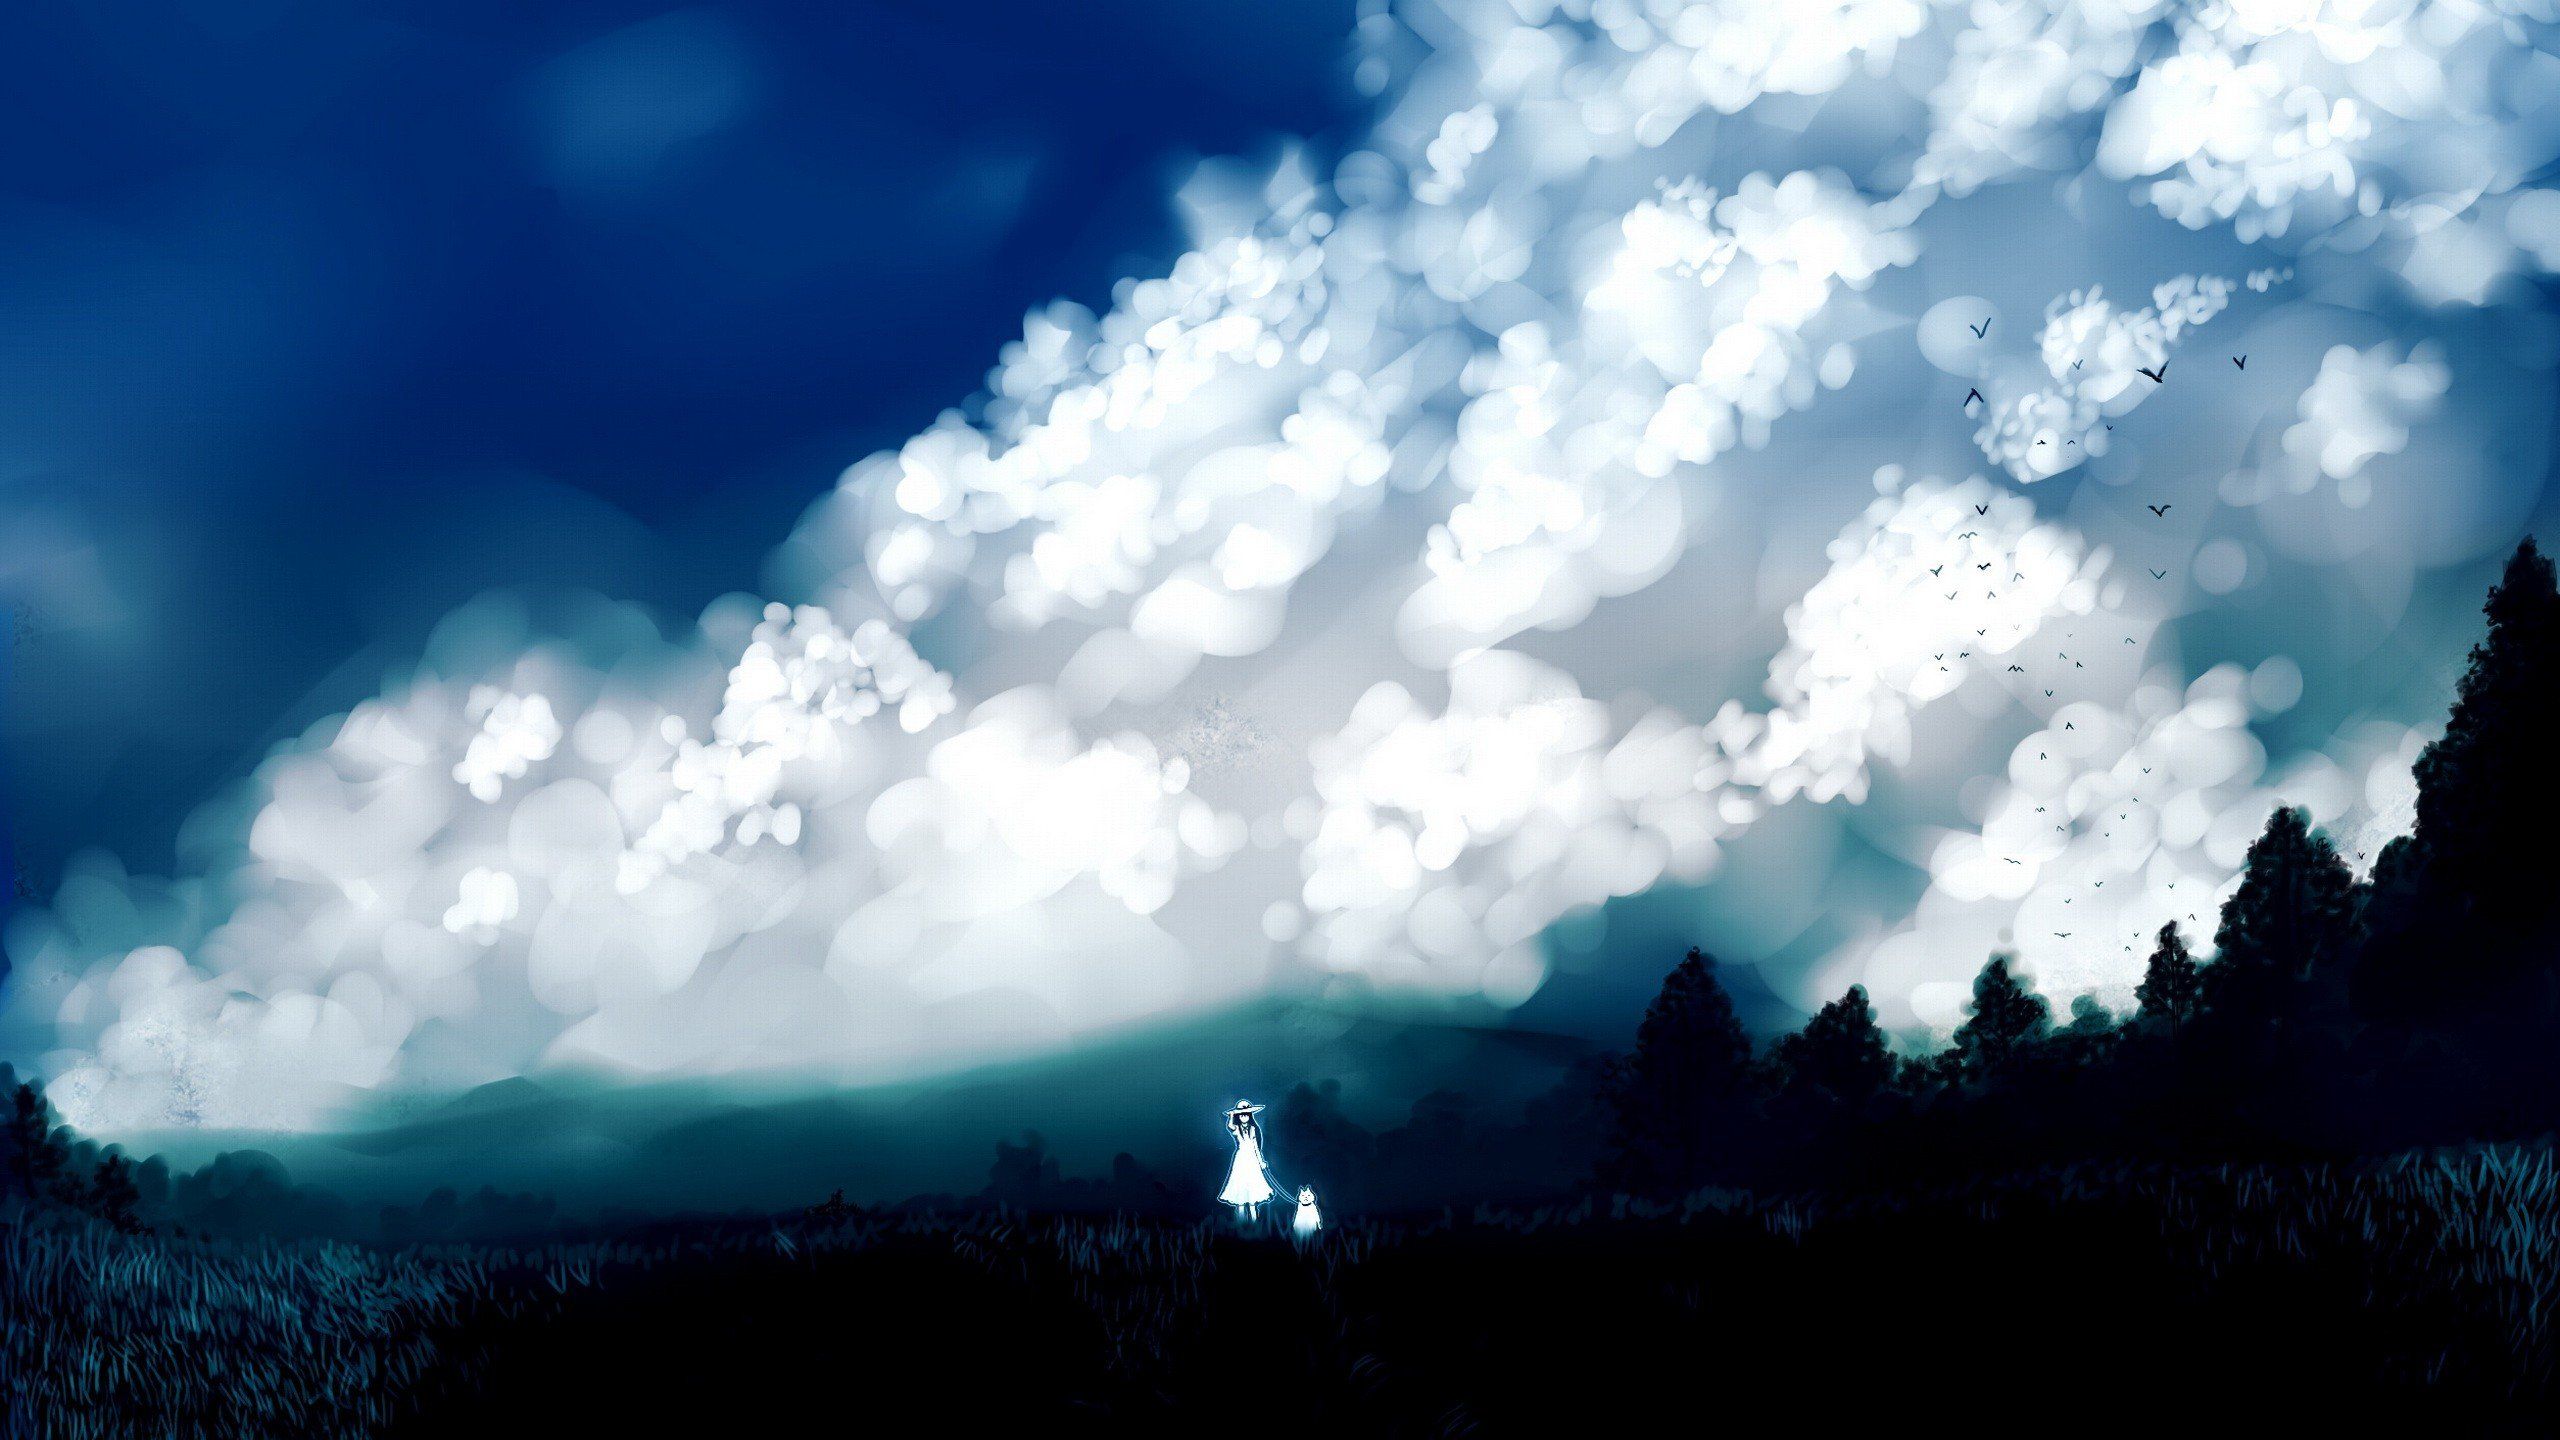 clouds, Landscapes, Nature, Trees, Dress, Forests, Birds, Grass, Dogs, Long, Hair, Outdoors, Scenic, White, Dress, Skyscapes, Hats, Anime, Girls, Black, Hair, Skies, Original, Characters Wallpaper HD / Desktop and Mobile Background